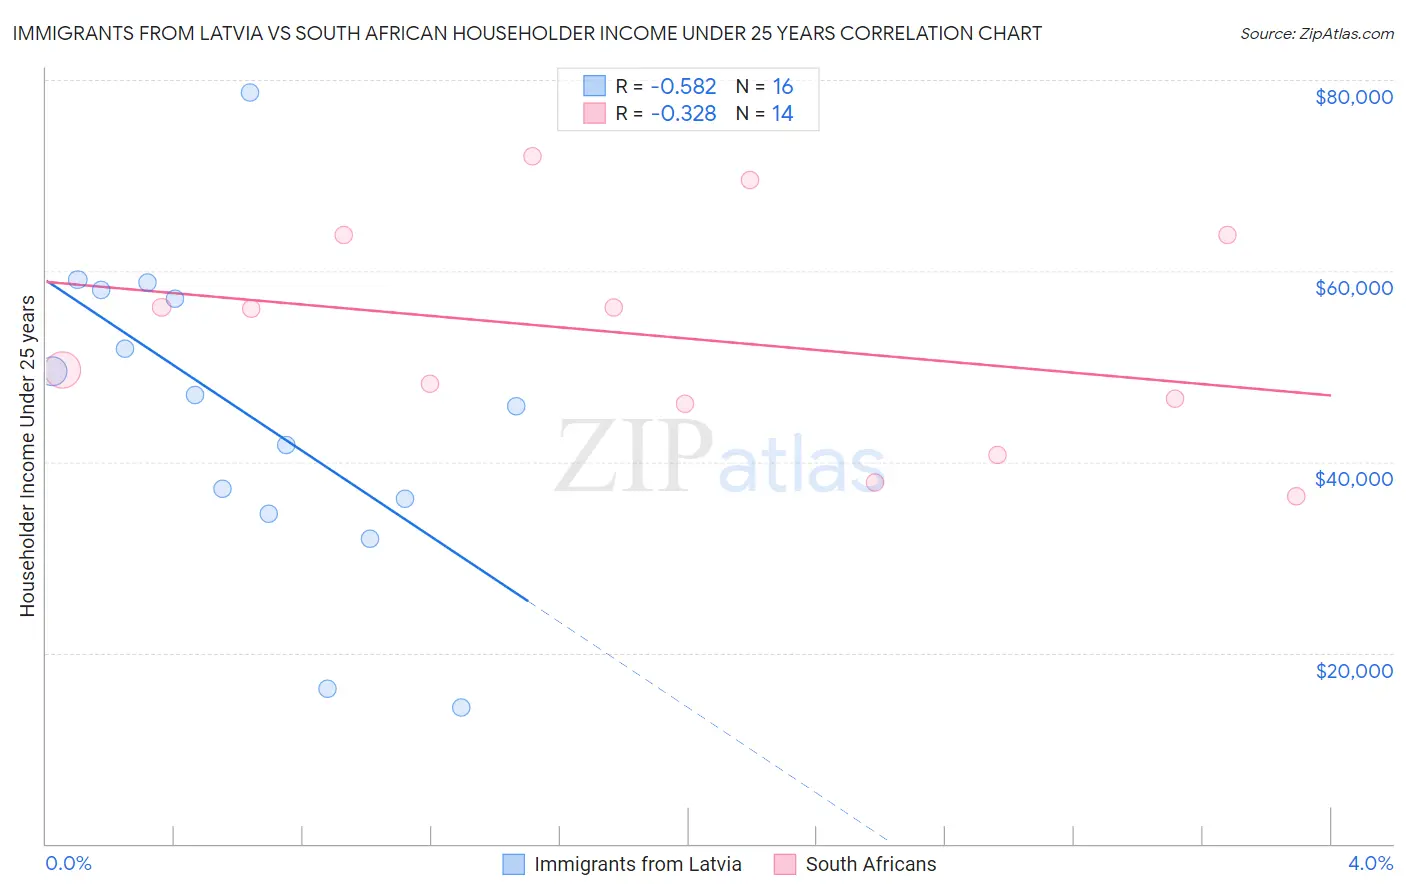 Immigrants from Latvia vs South African Householder Income Under 25 years